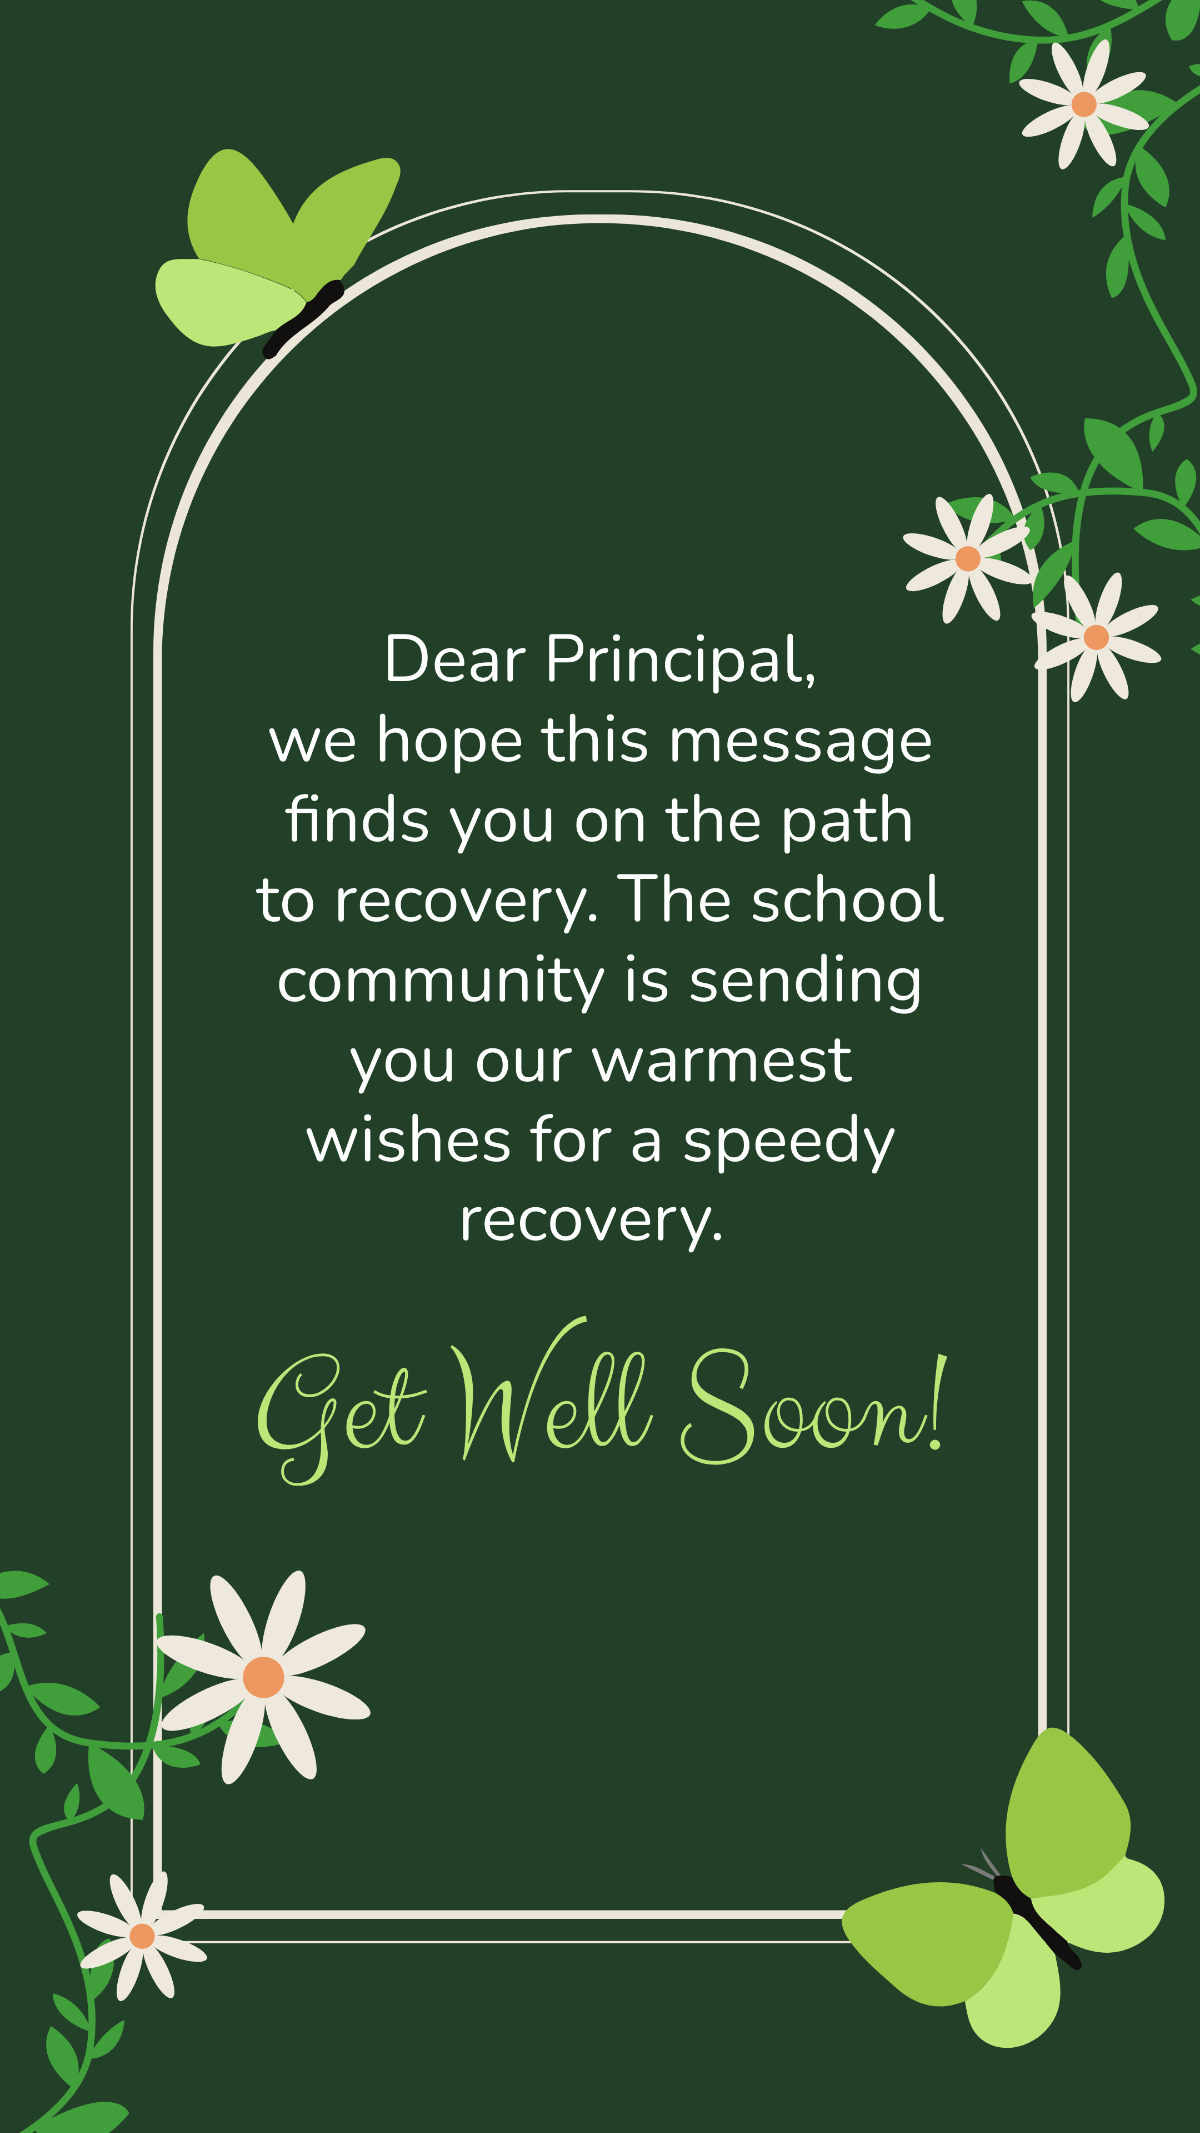 Get Well Soon Message For Principal Template